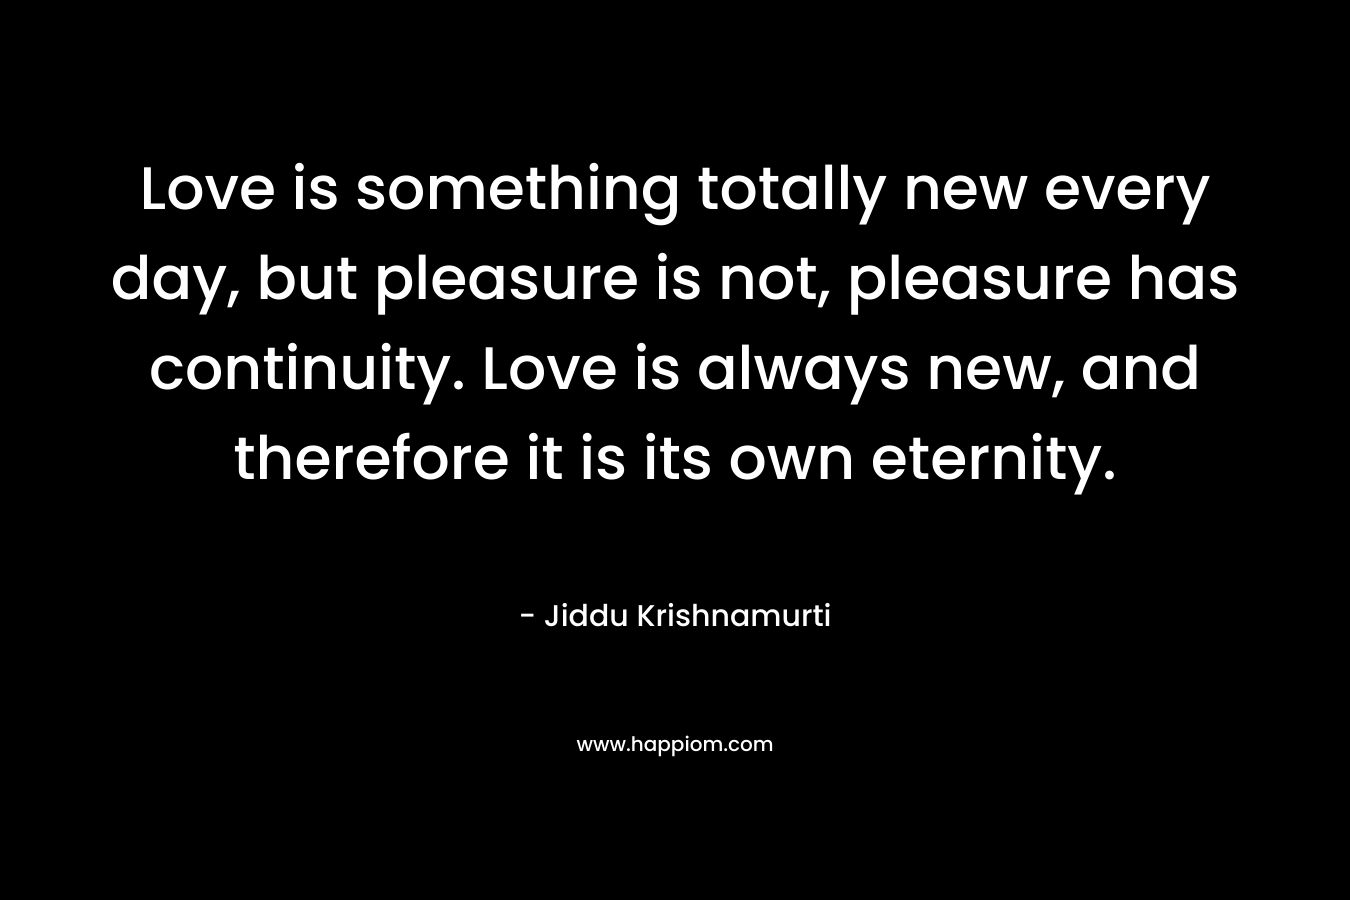 Love is something totally new every day, but pleasure is not, pleasure has continuity. Love is always new, and therefore it is its own eternity.